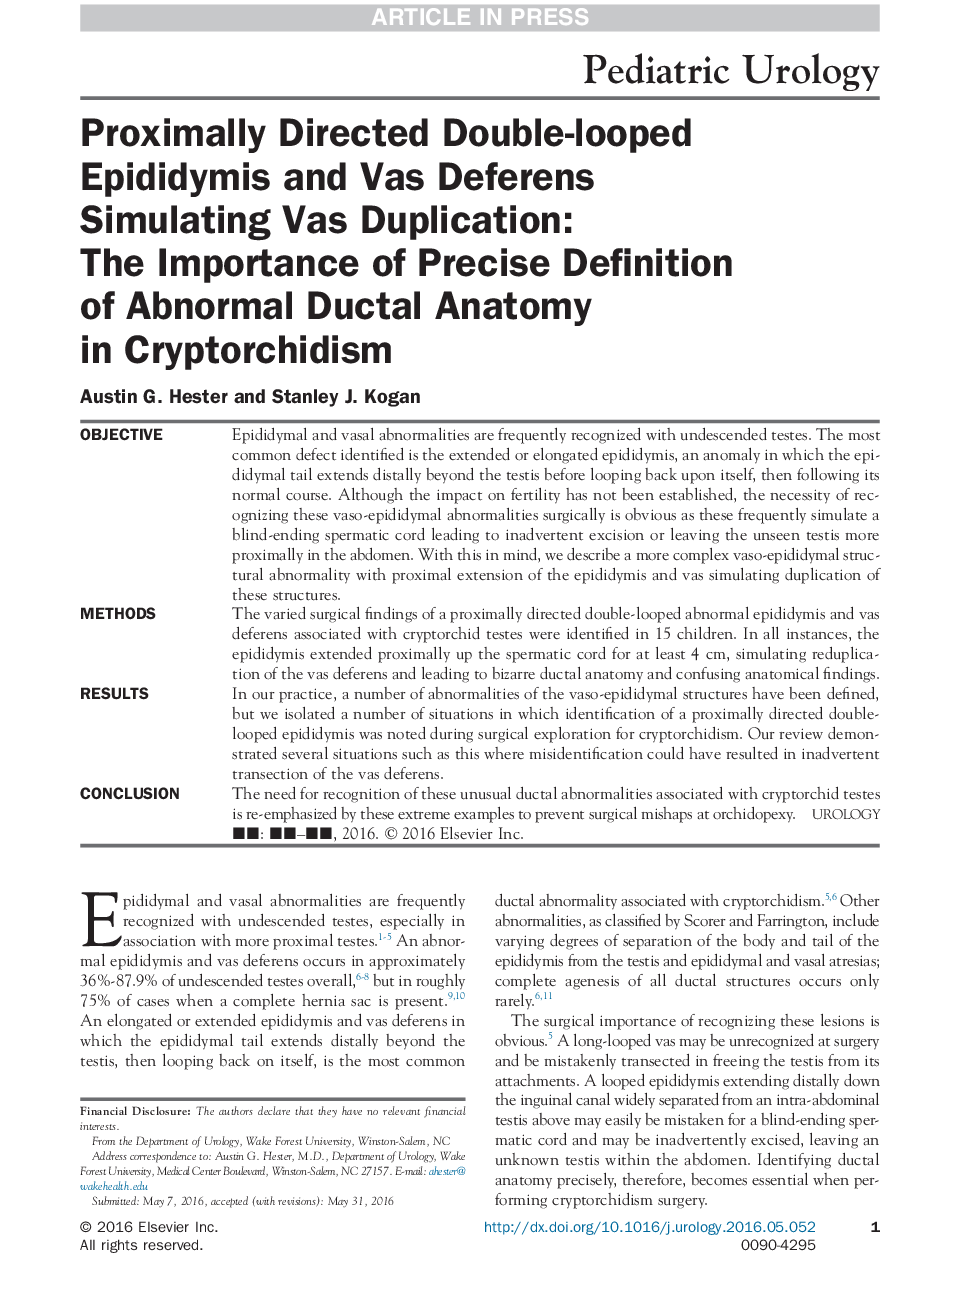 Proximally Directed Double-looped Epididymis and Vas Deferens Simulating Vas Duplication: The Importance of Precise Definition of Abnormal Ductal Anatomy in Cryptorchidism